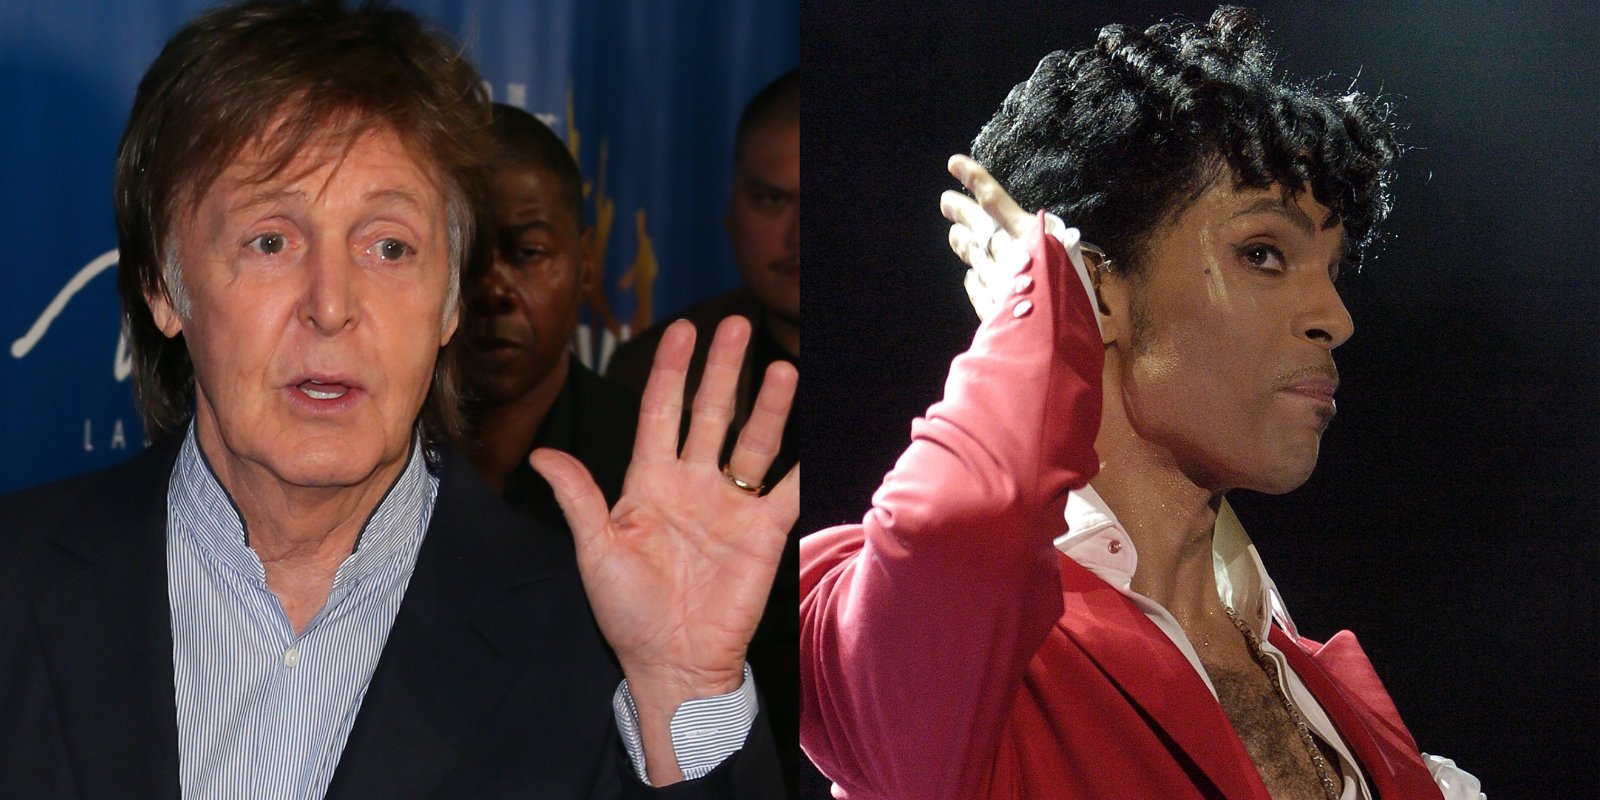 Paul McCartney and Prince pose together in side by side photographs.